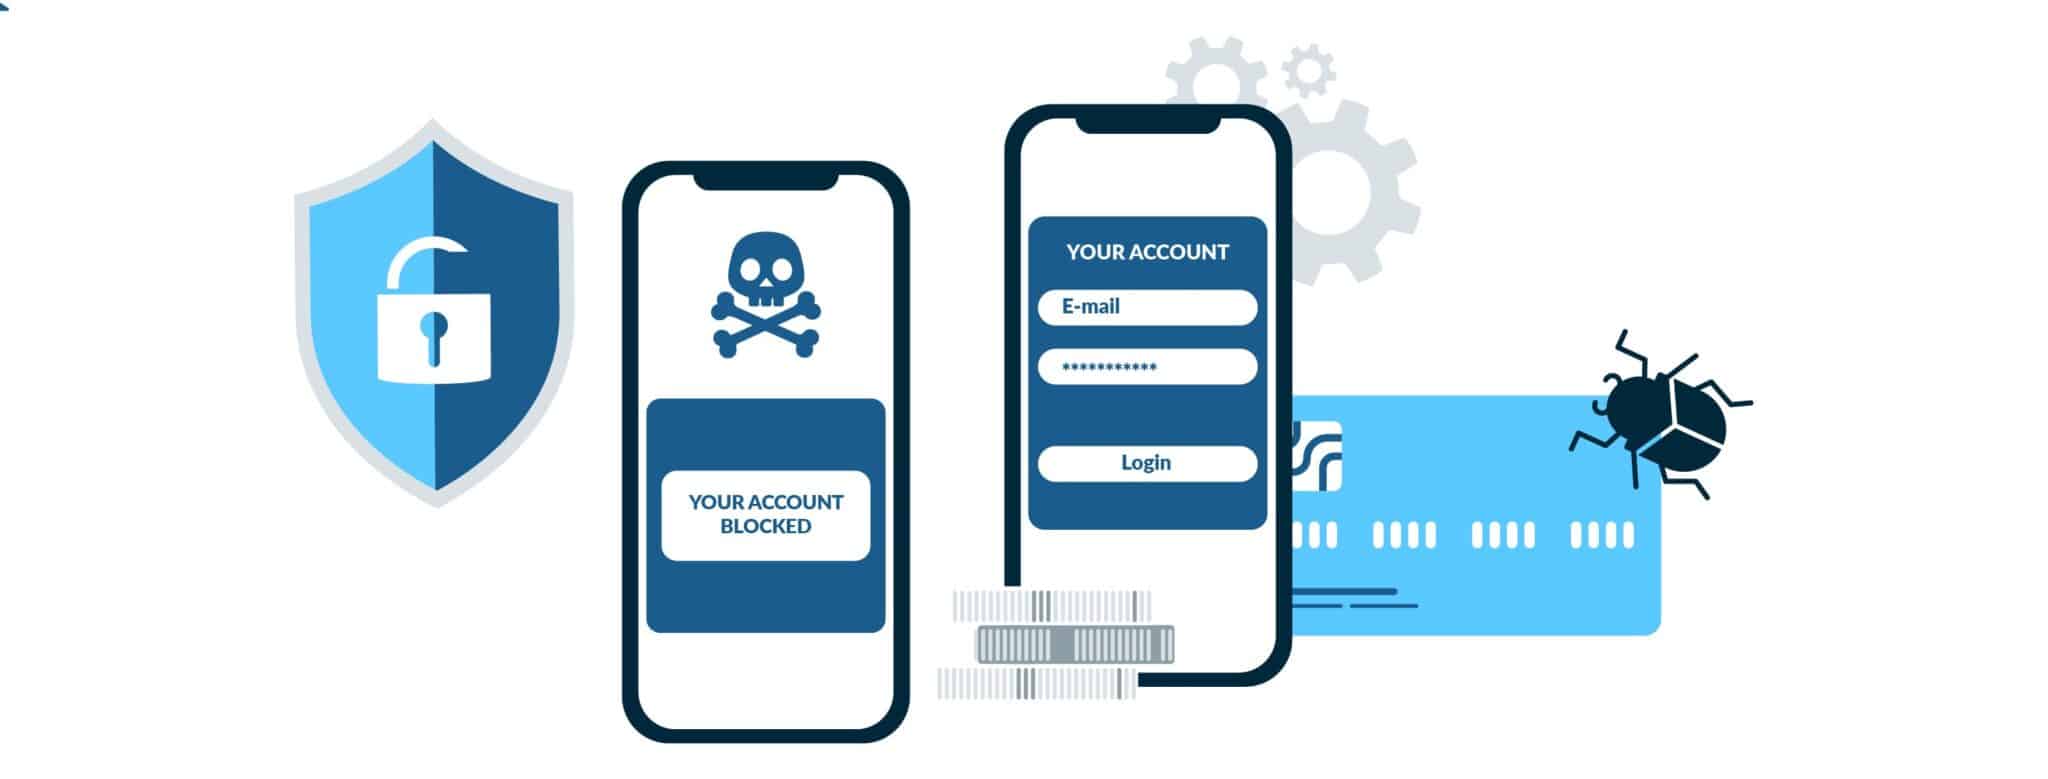 Man-in-the-middle attacks on mobile banking apps